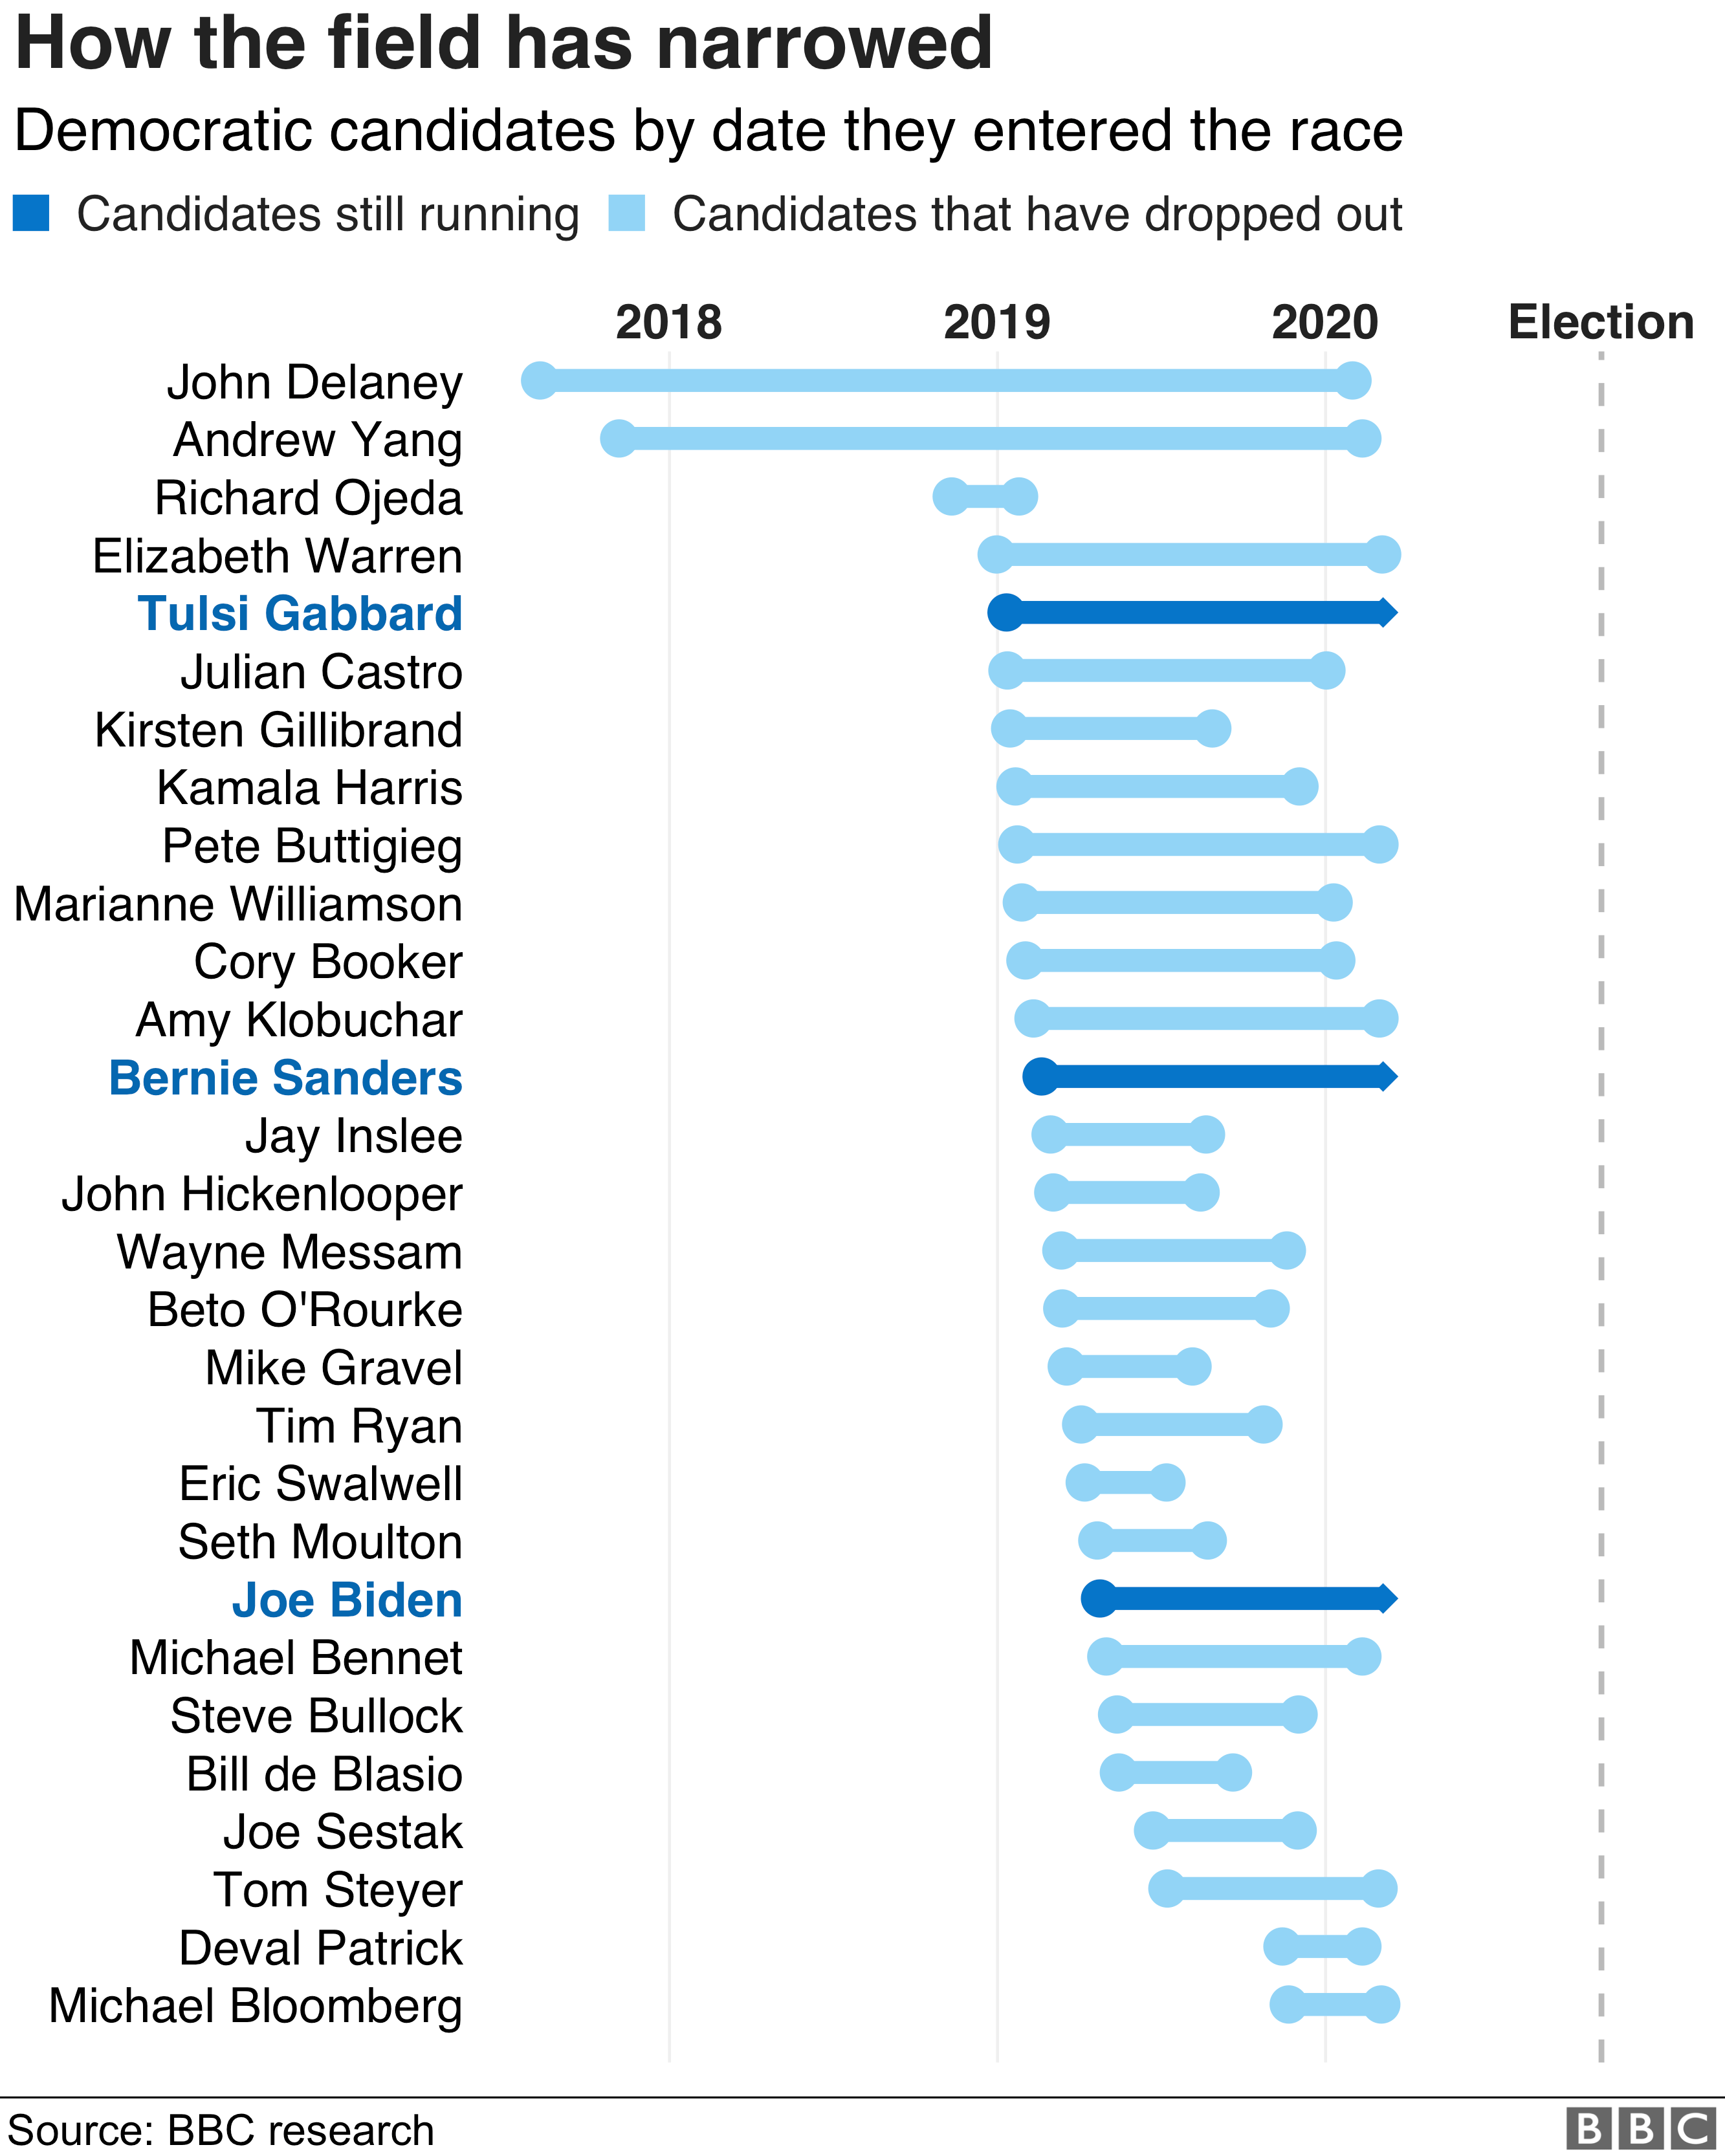 Chart showing when Democratic candidates joined the race and when they dropped out